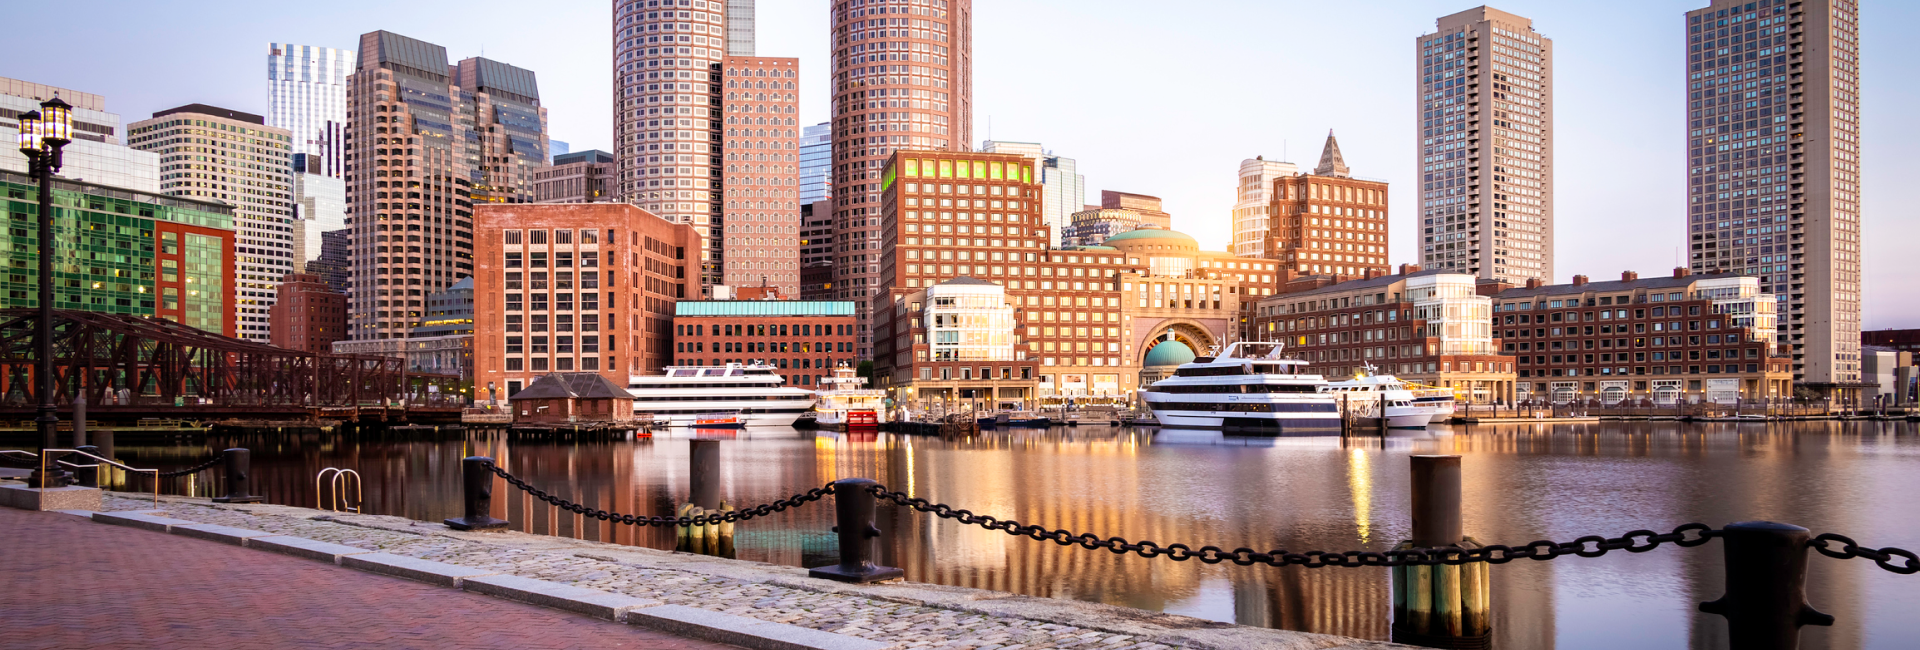 Boston skyline at sunset with net zero buildings, showcasing sustainable architecture and energy efficiency.